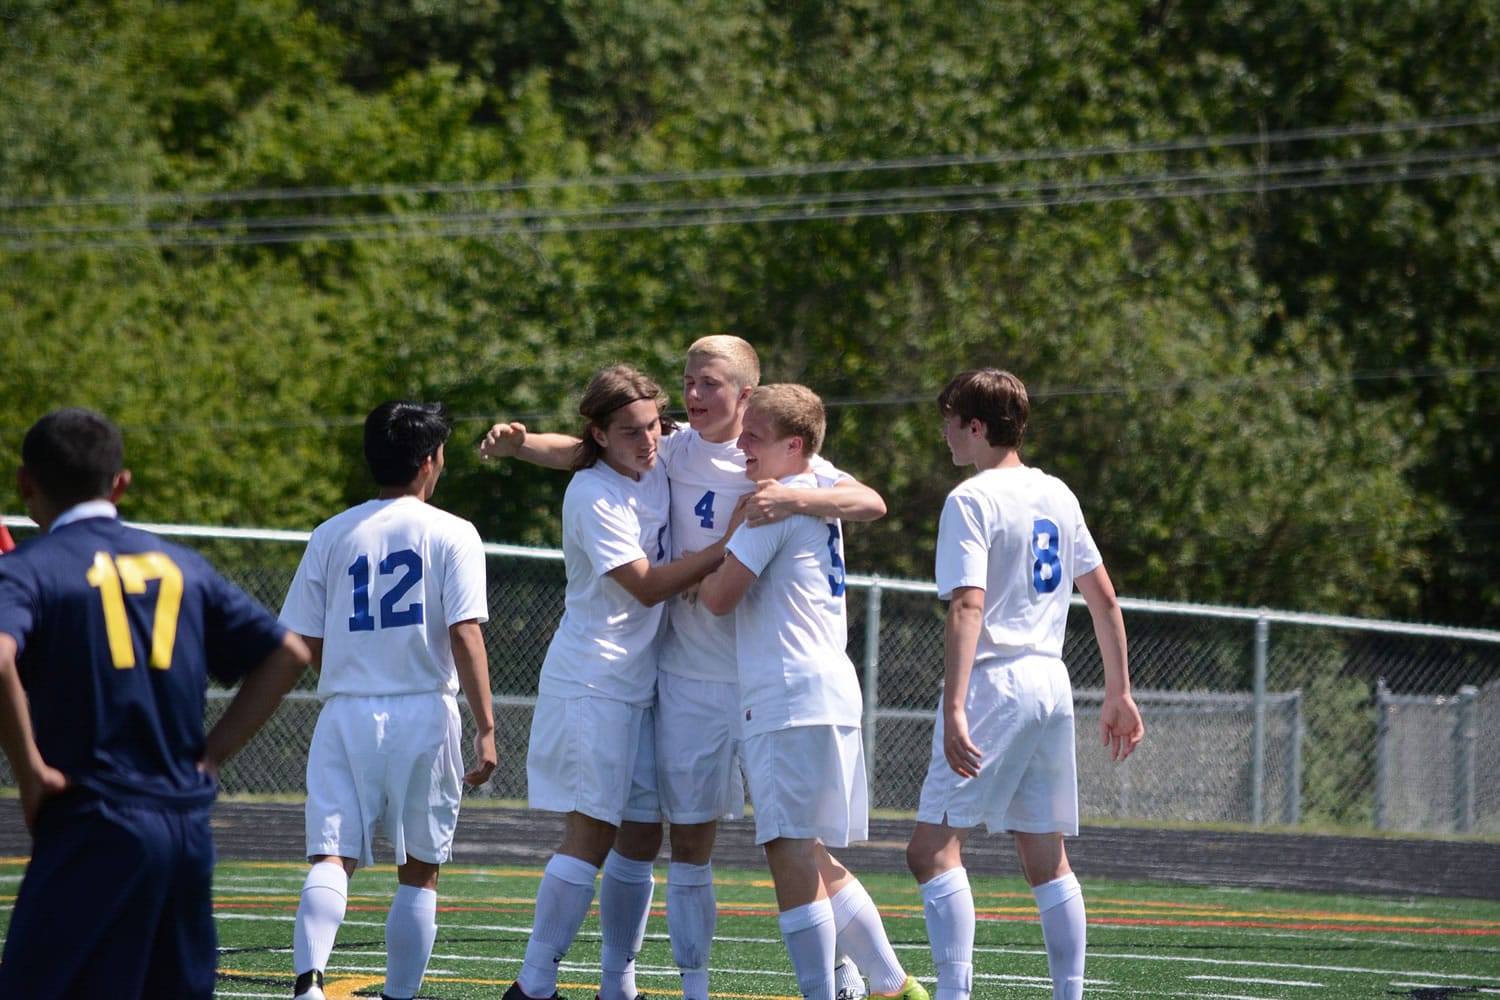 Ridgefield's Max Hauser (4) is congratulated by teammates after scoring the winning goal late in a 2A district boys soccer match Saturday, May 9, 2015, in Ridgefield.